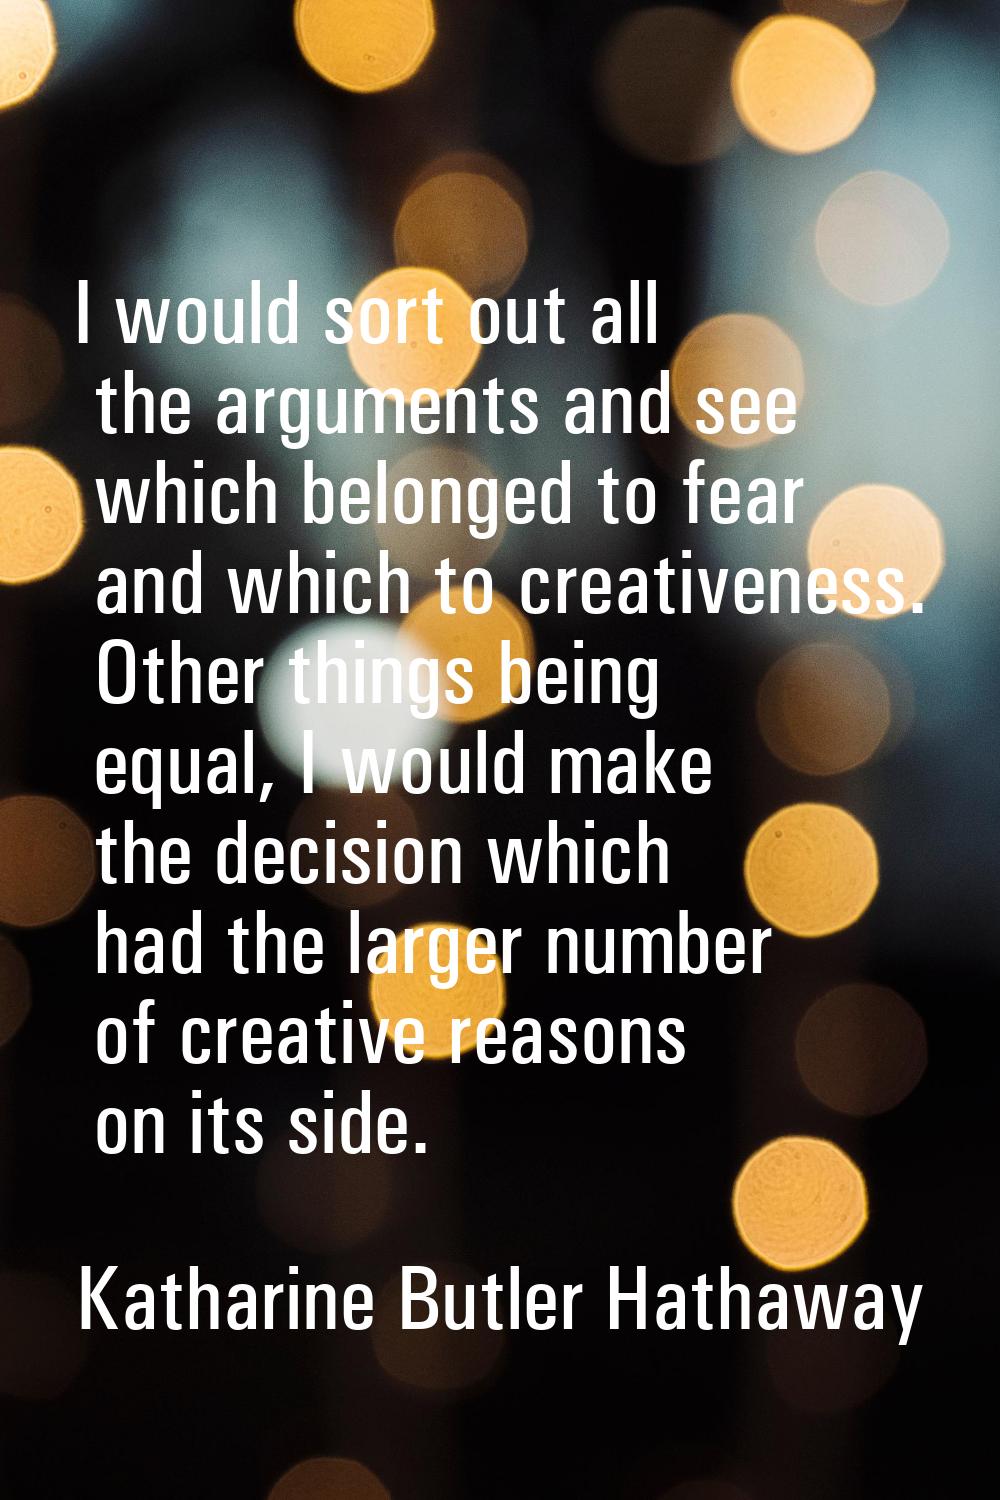 I would sort out all the arguments and see which belonged to fear and which to creativeness. Other 